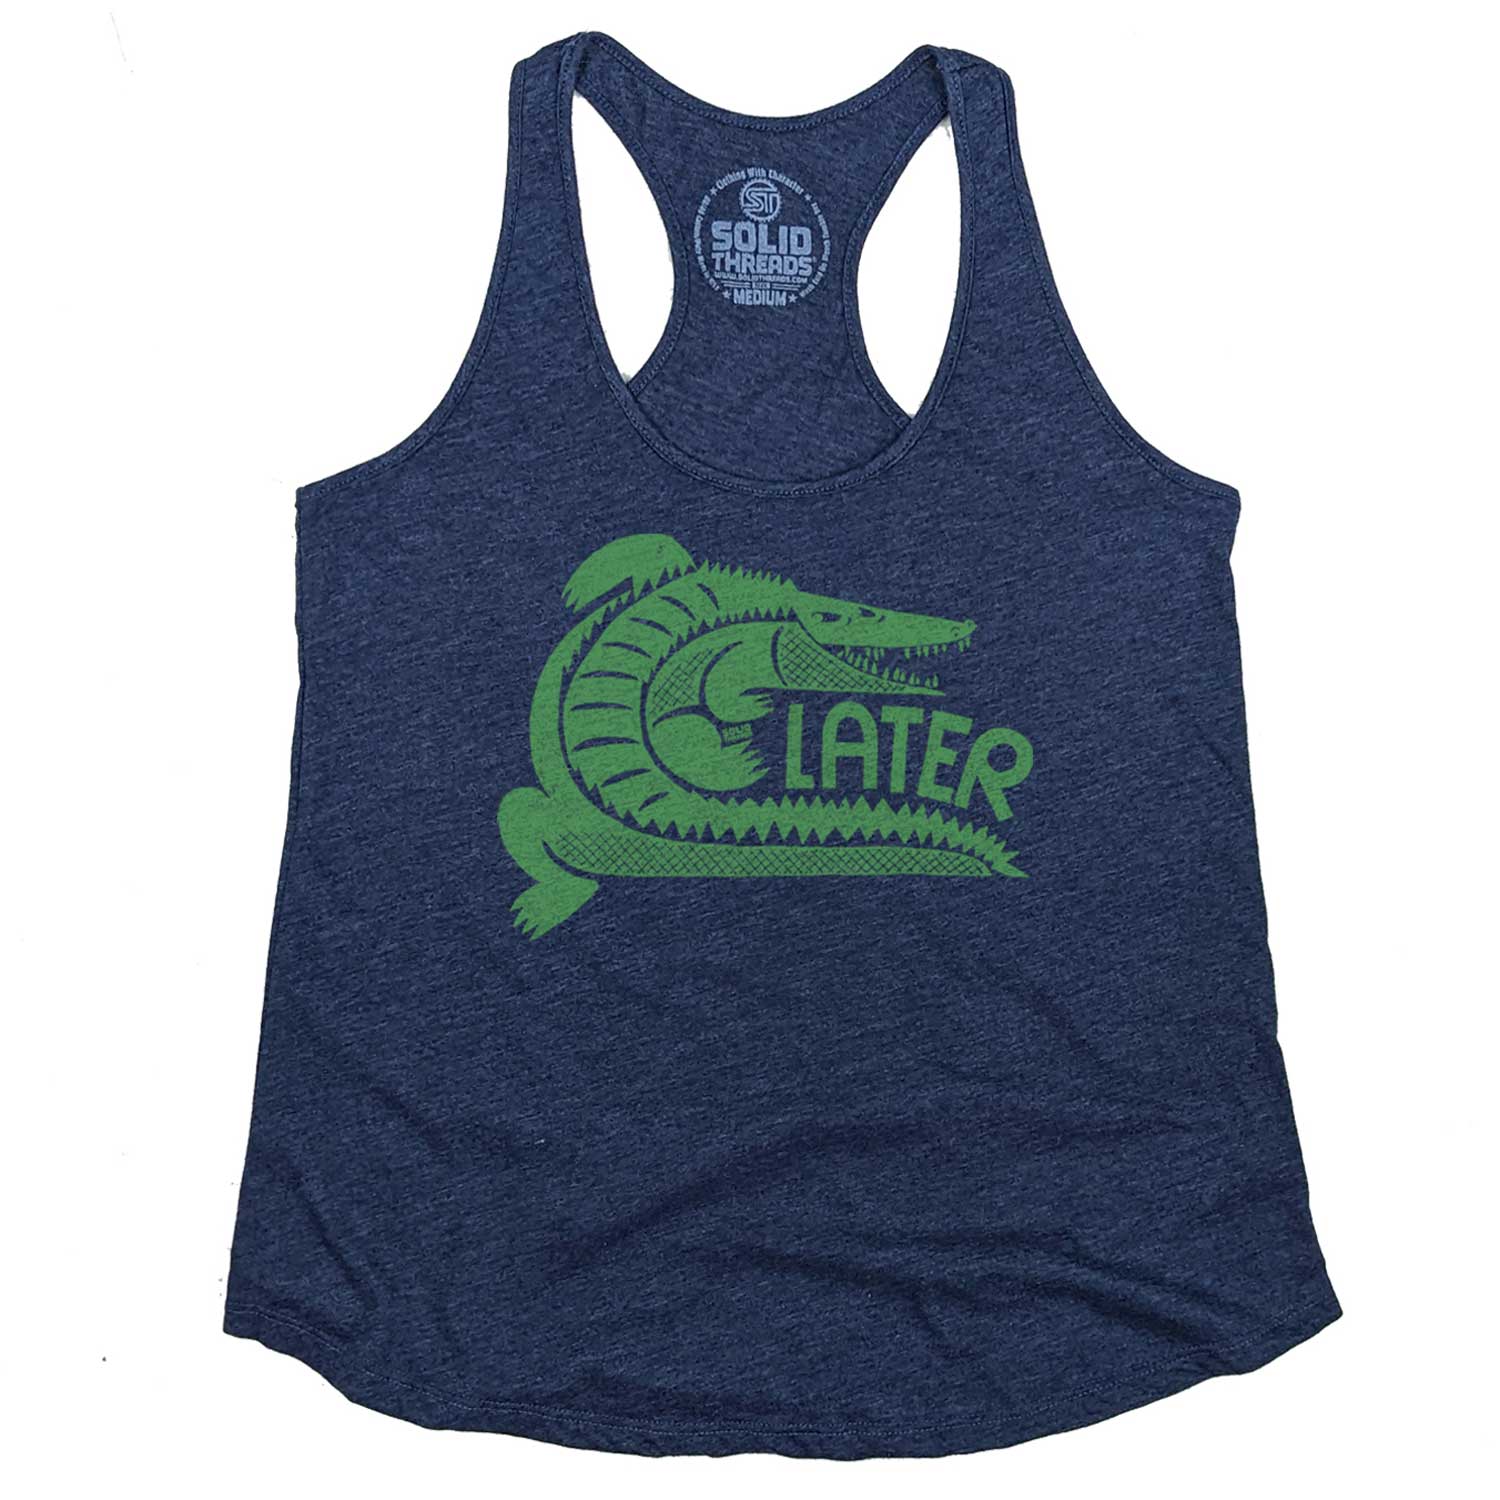 Women's Later Gator Vintage Graphic Tank Top | Funny Alligator T-shirt | Solid Threads